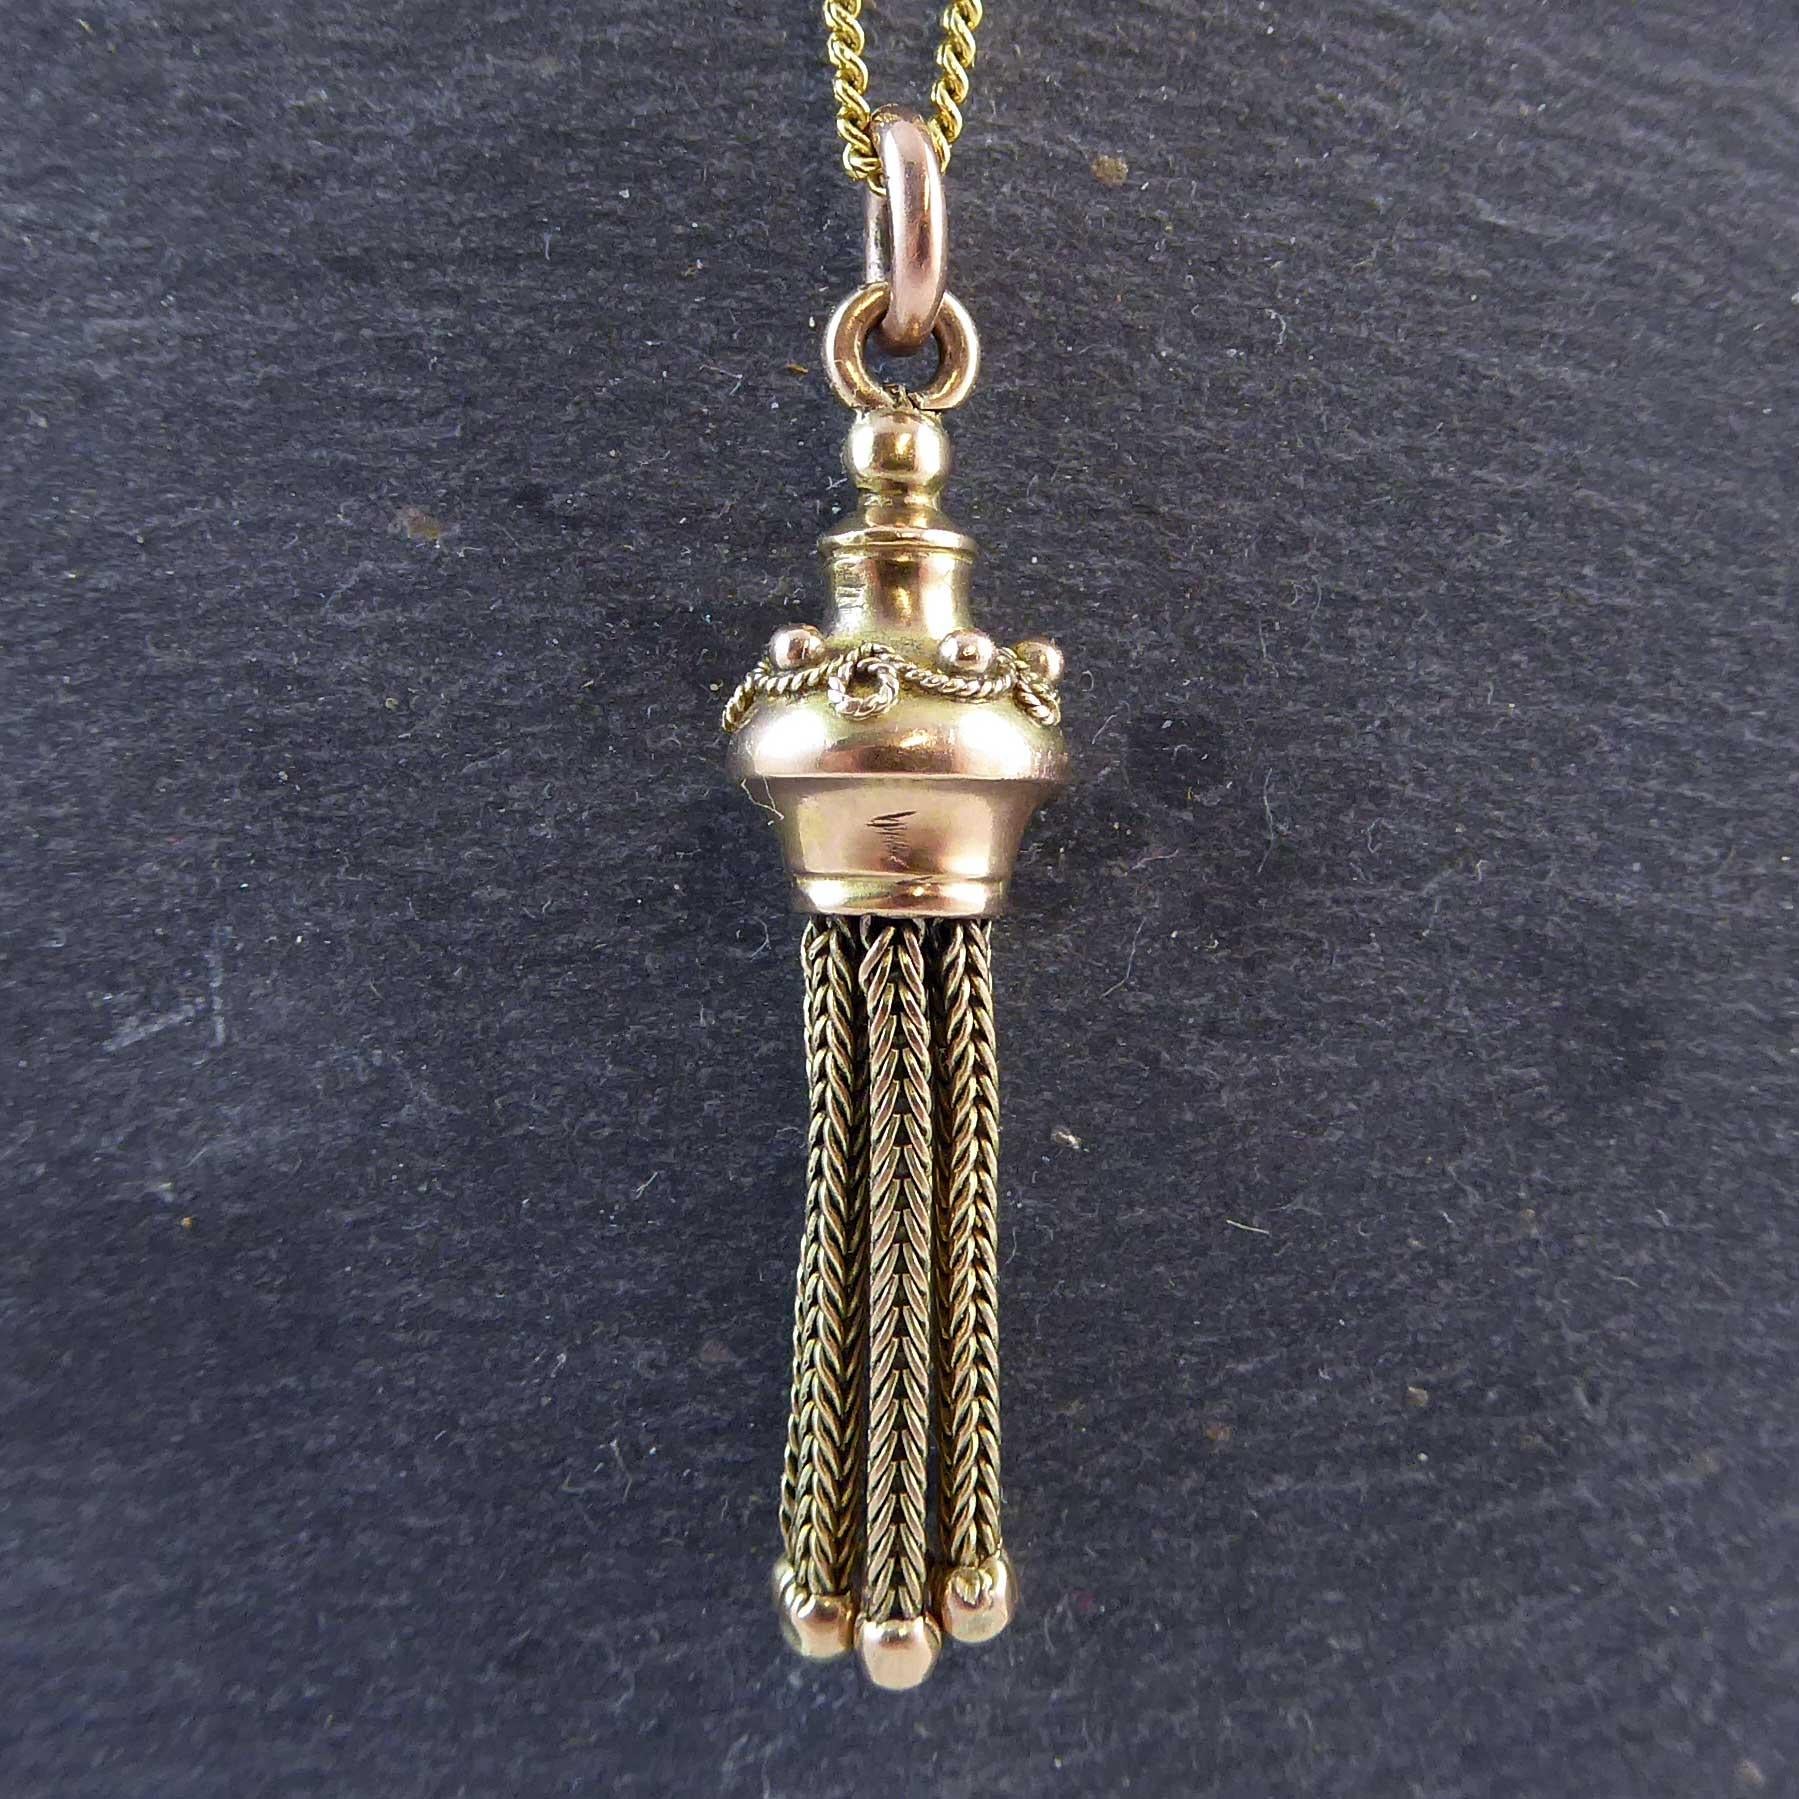 Antique Victorian Gold Tassel Pendant with Modern Chain, 9 Carat Yellow Gold 3